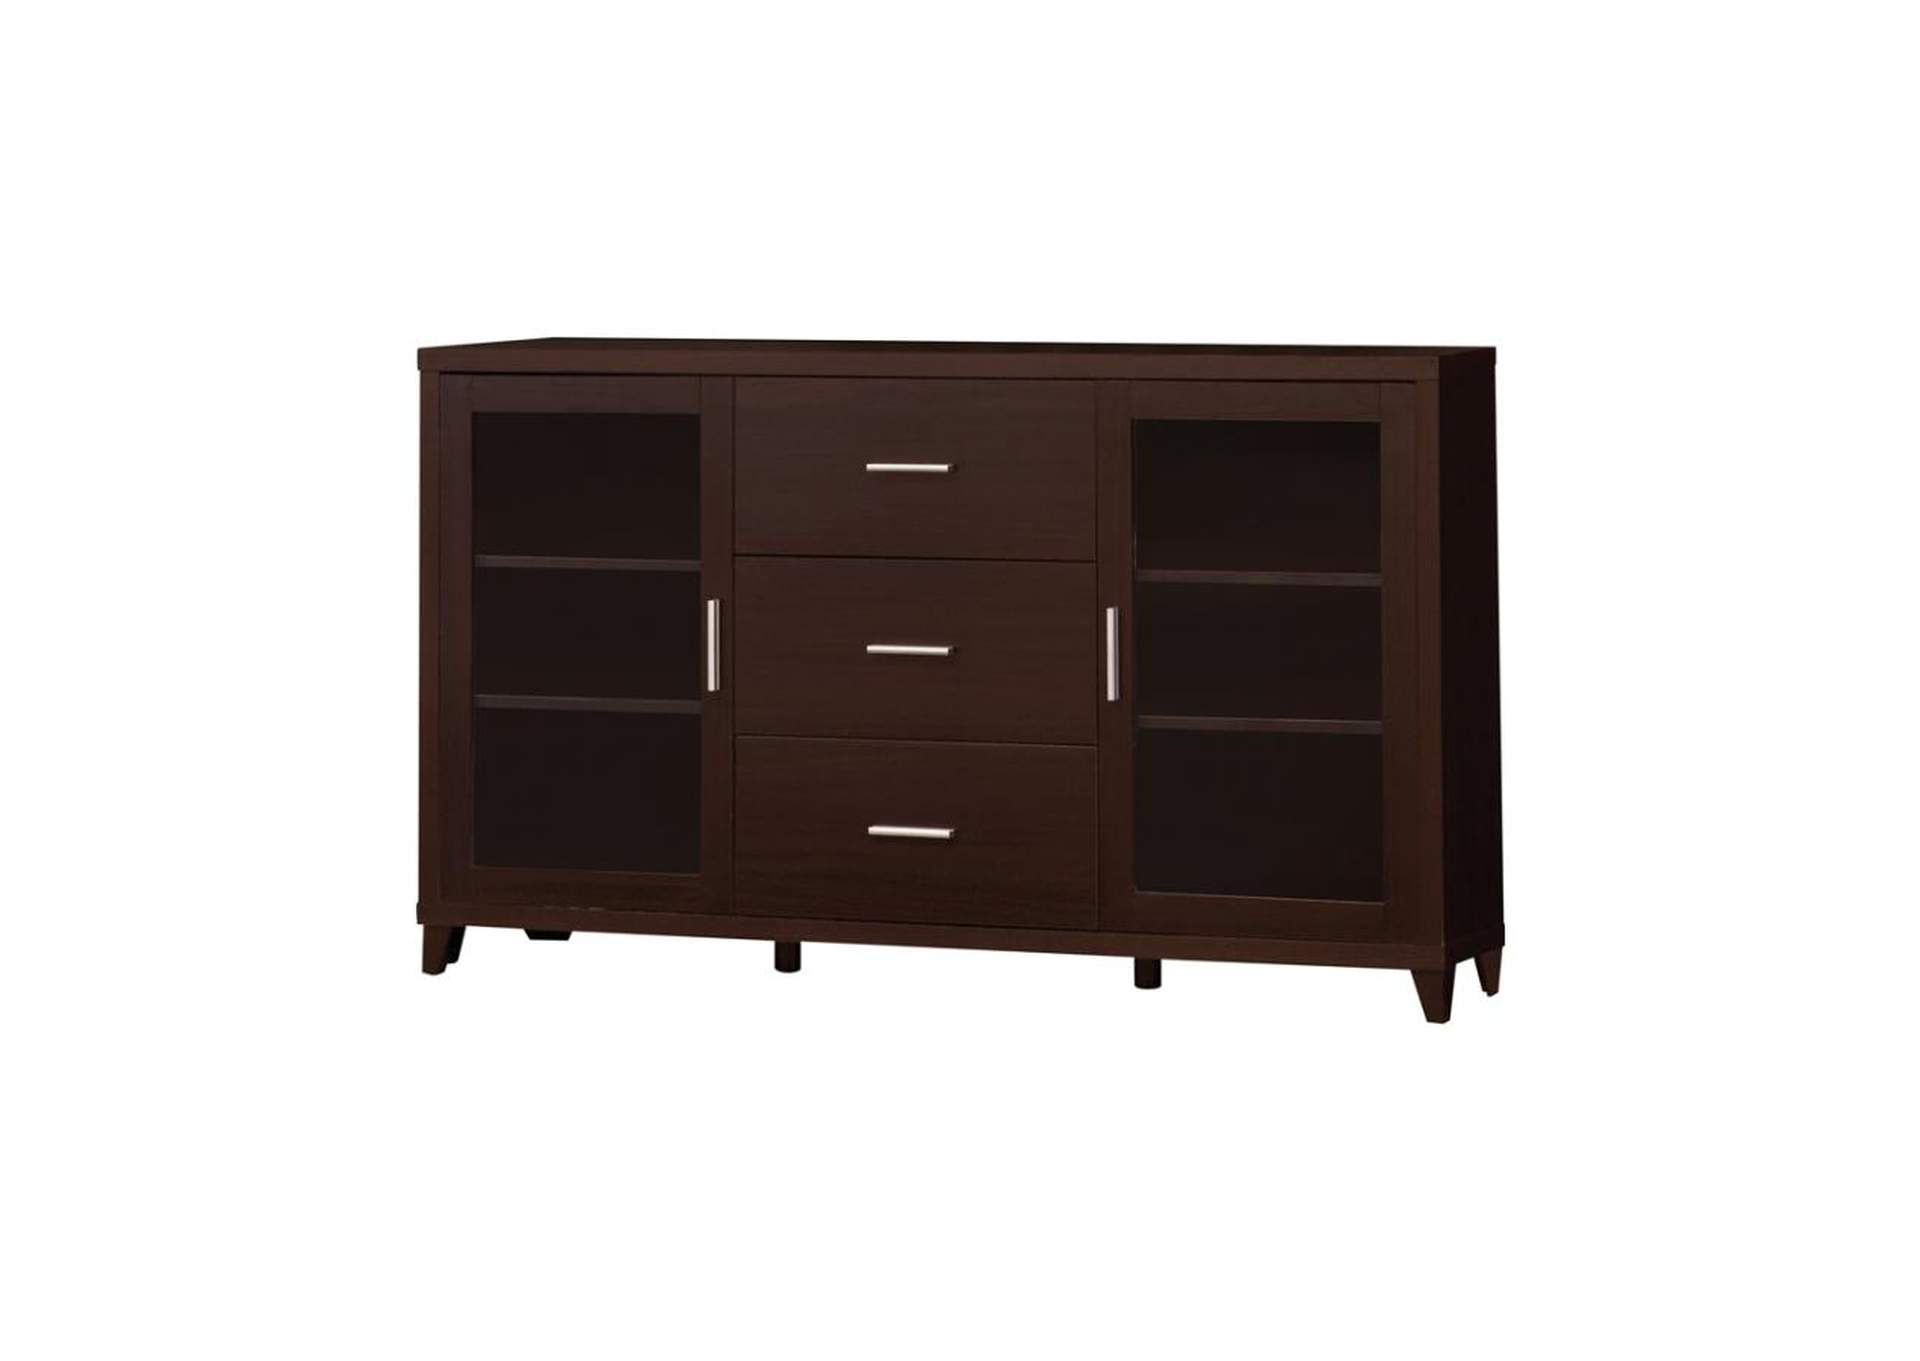 Lewes 2-door TV Stand with Adjustable Shelves Cappuccino,Coaster Furniture